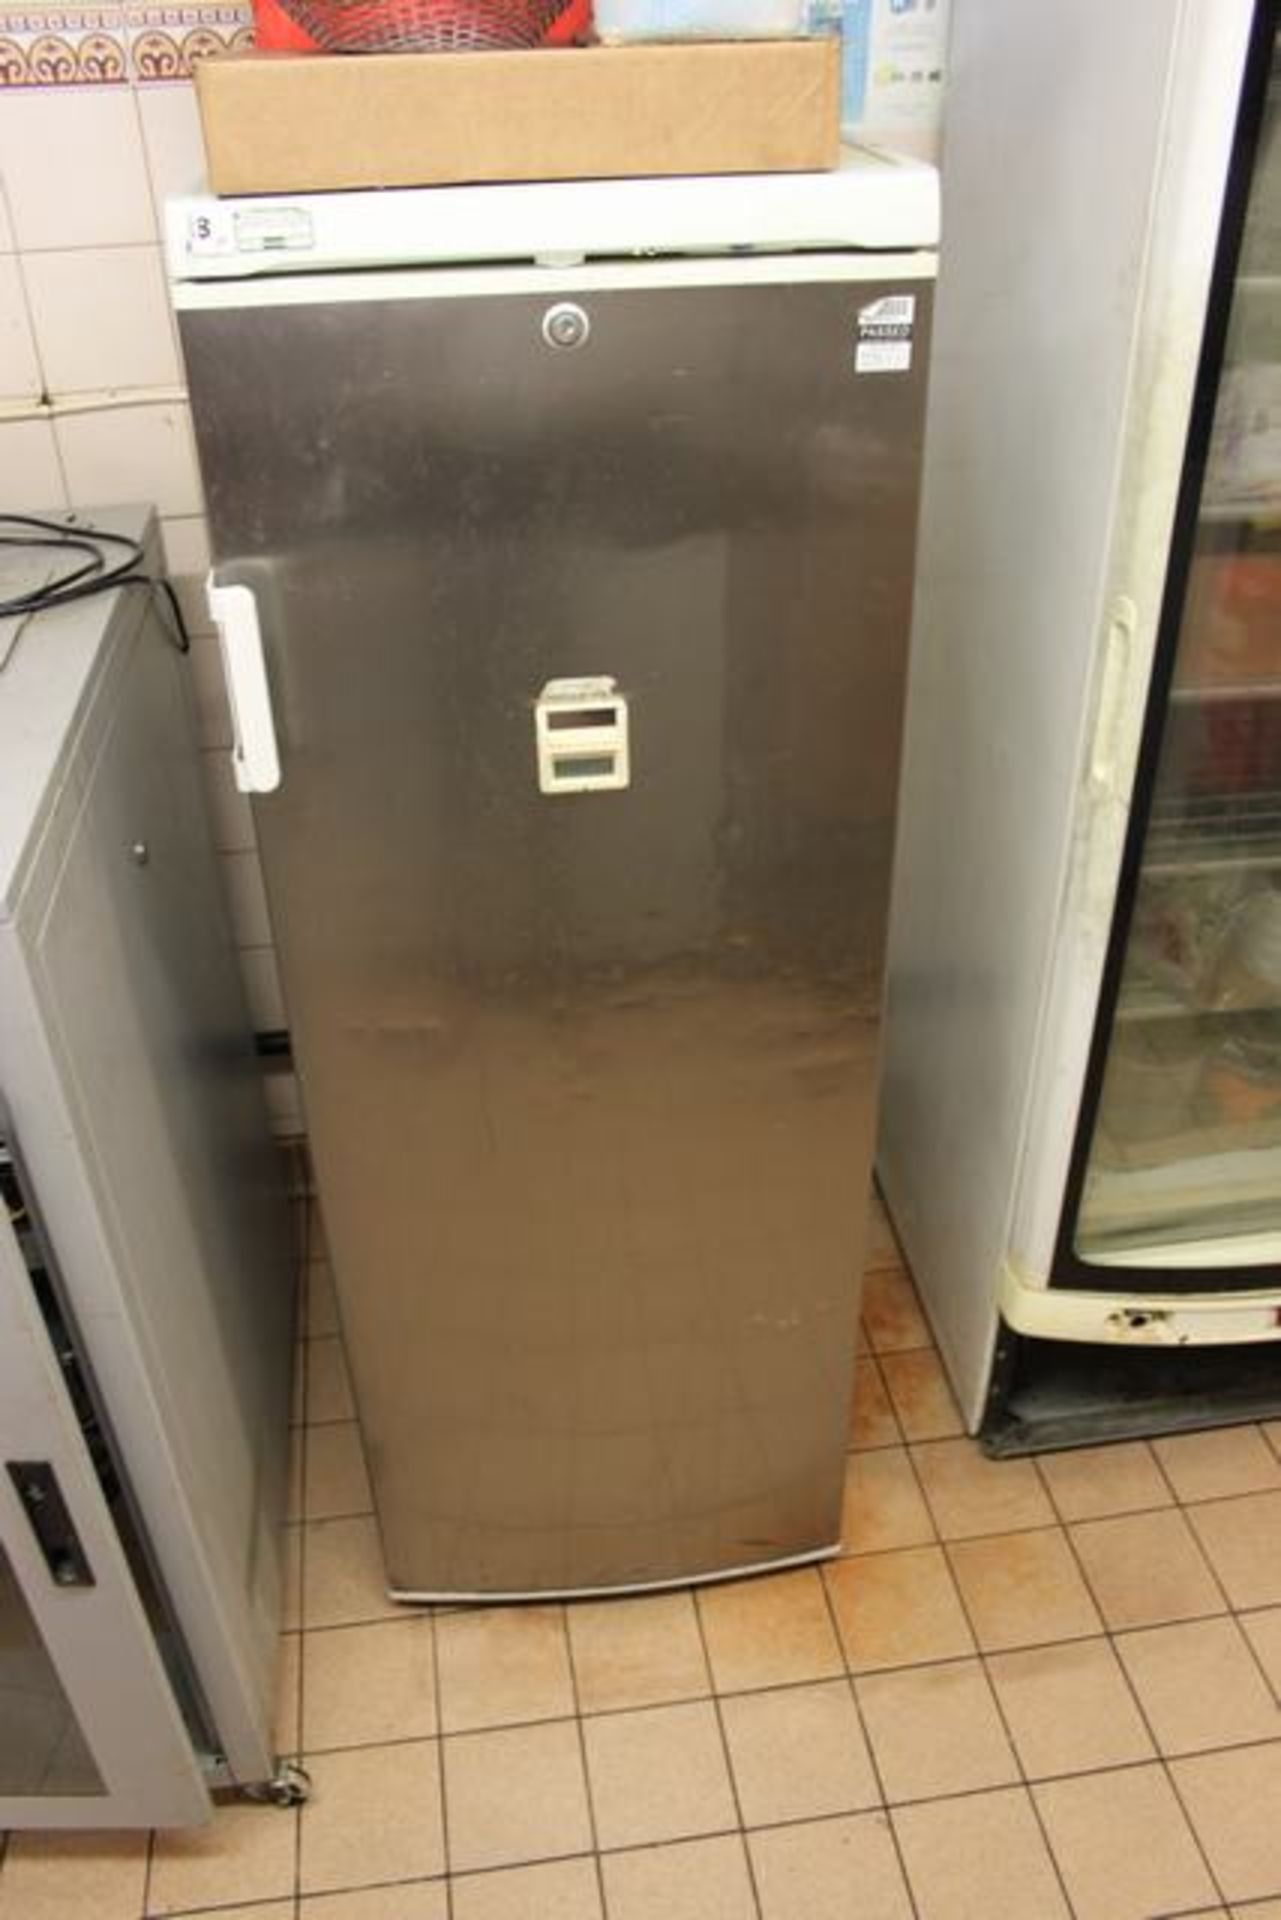 LEC commercial freestanding stainless steel freezer Large 400L Capacity - Maximises available